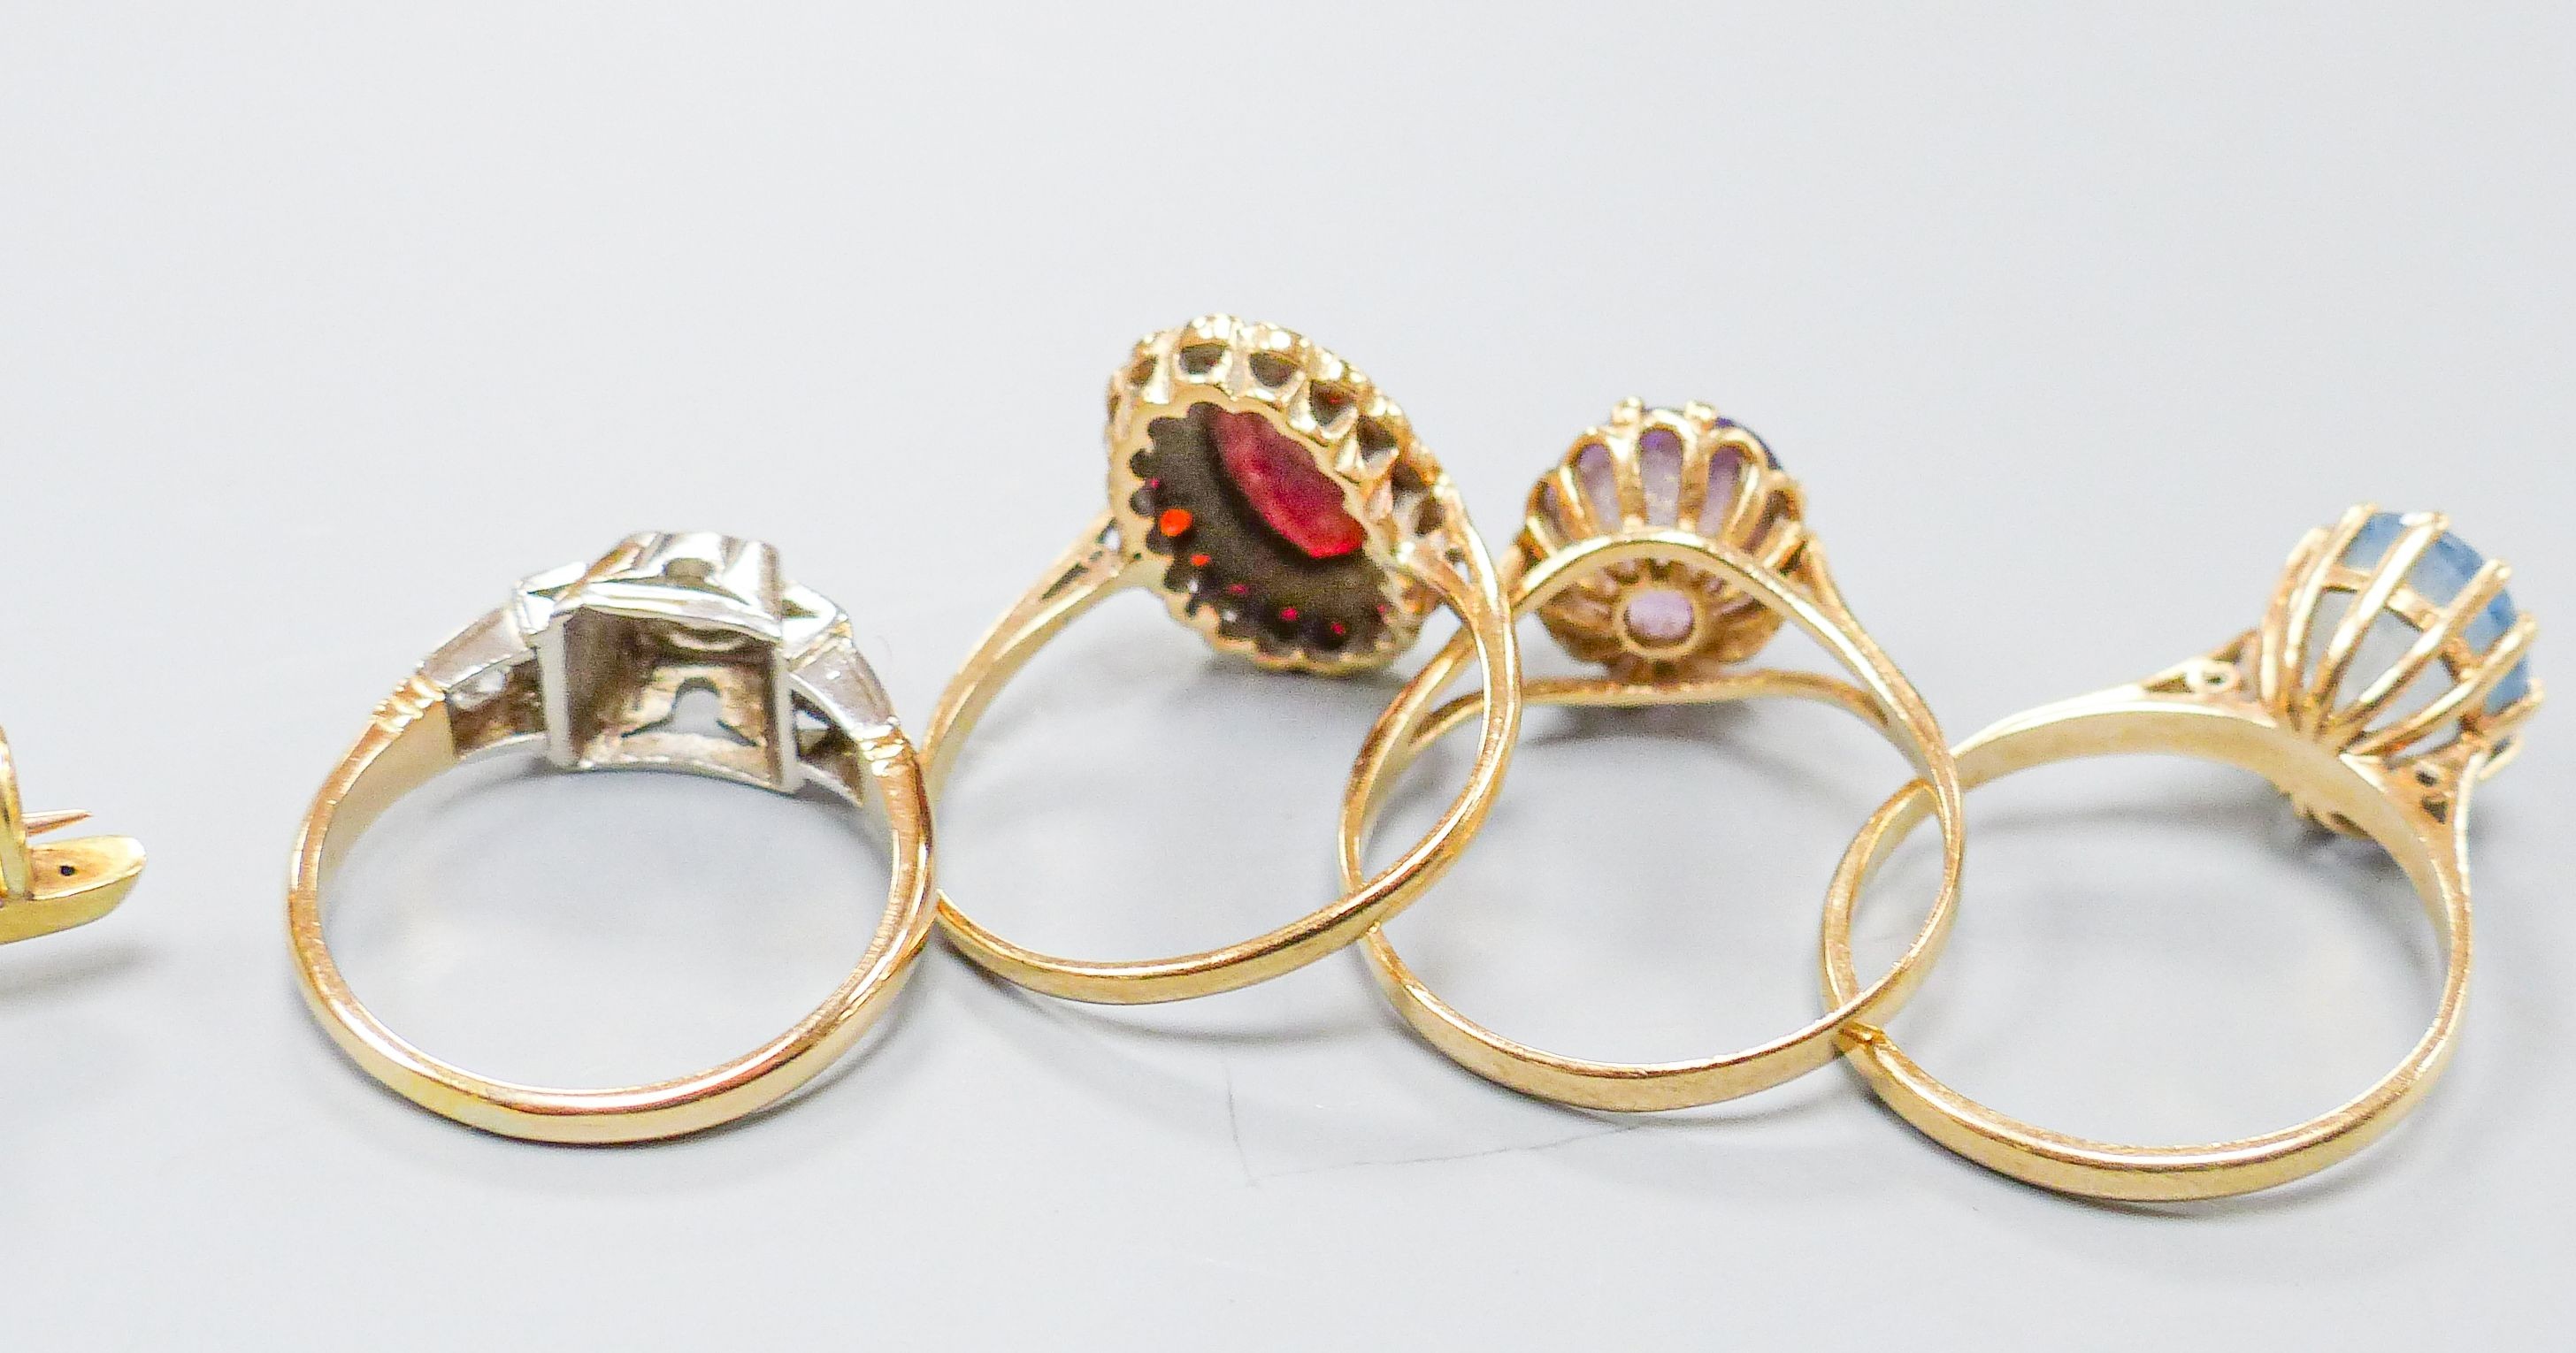 Three 18ct gold and gem set rings including two five stone half hoop(one stone missing) and a sapphire and diamond three stone, gross weight 7.3 grams, four 9ct and gem set rings and a 9ct pendant, gross 11.8 grams, a 15